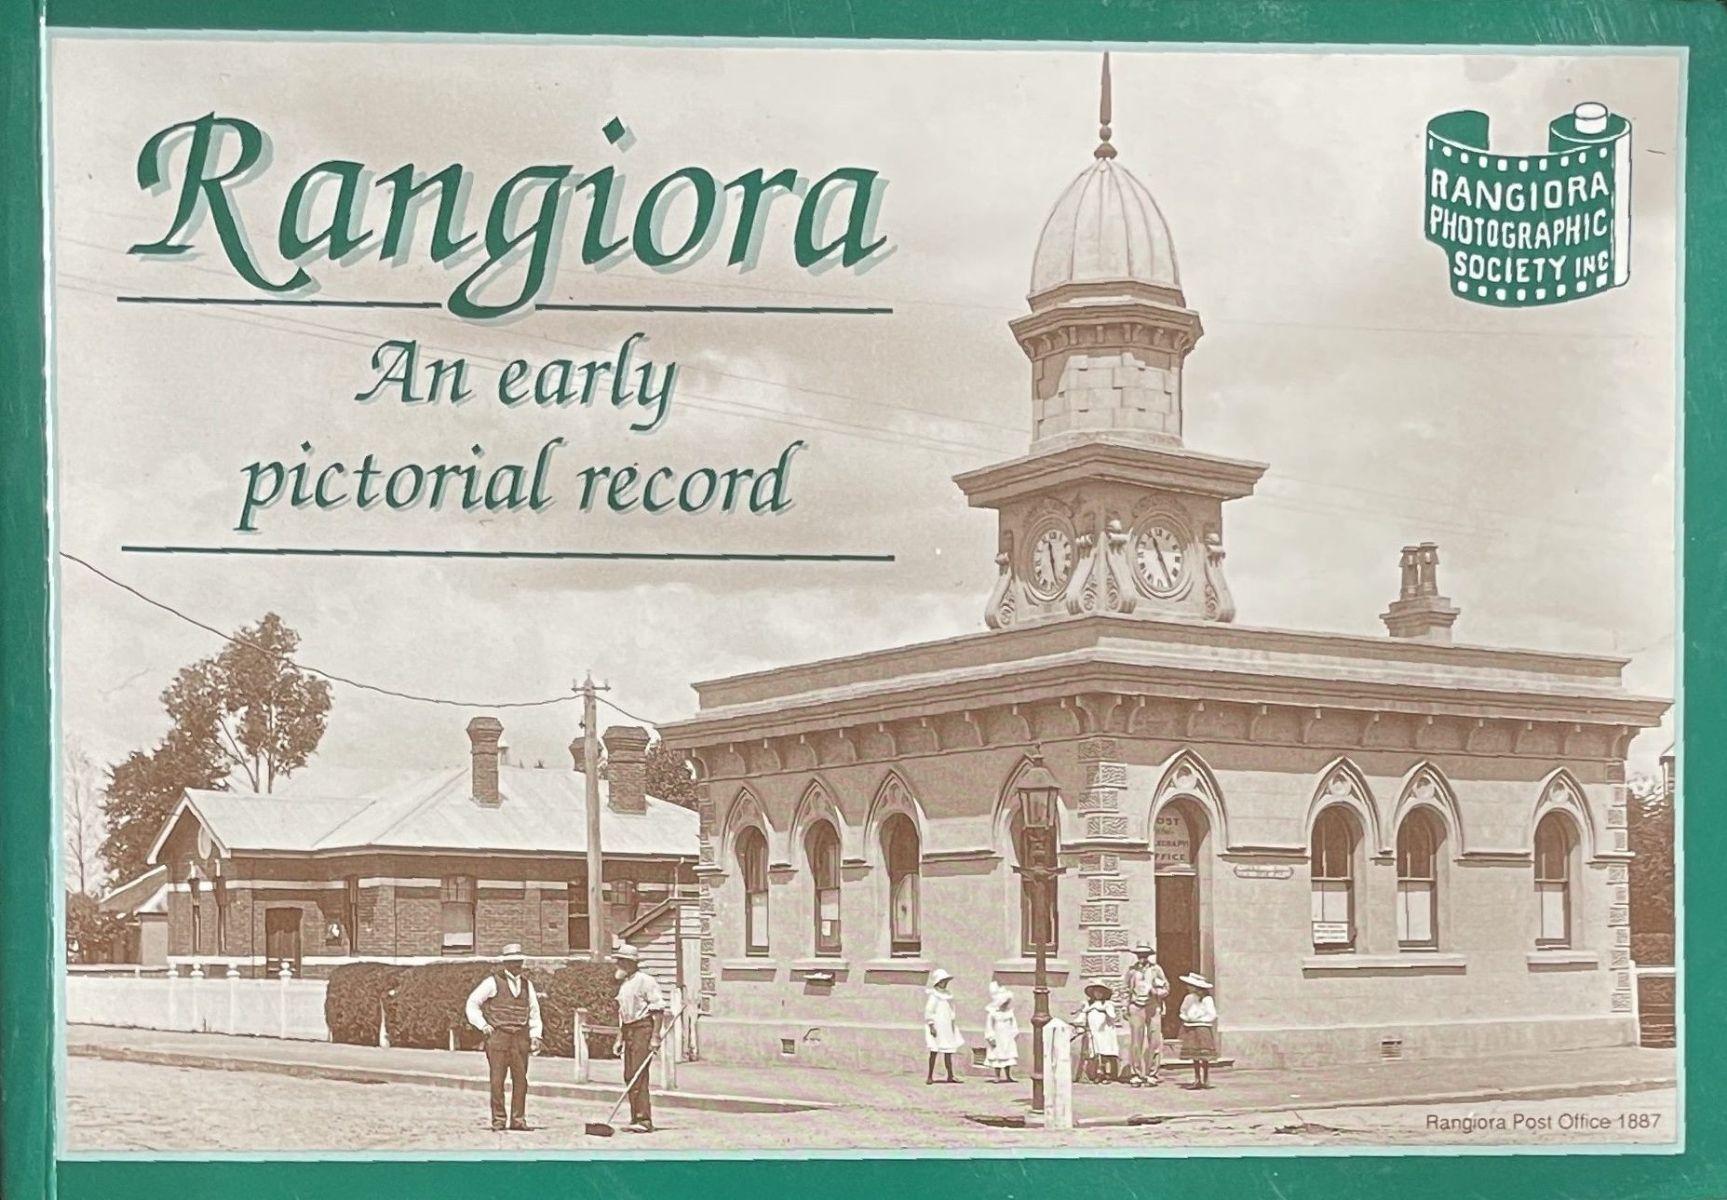 RANGIORA: An Early Pictorial Record